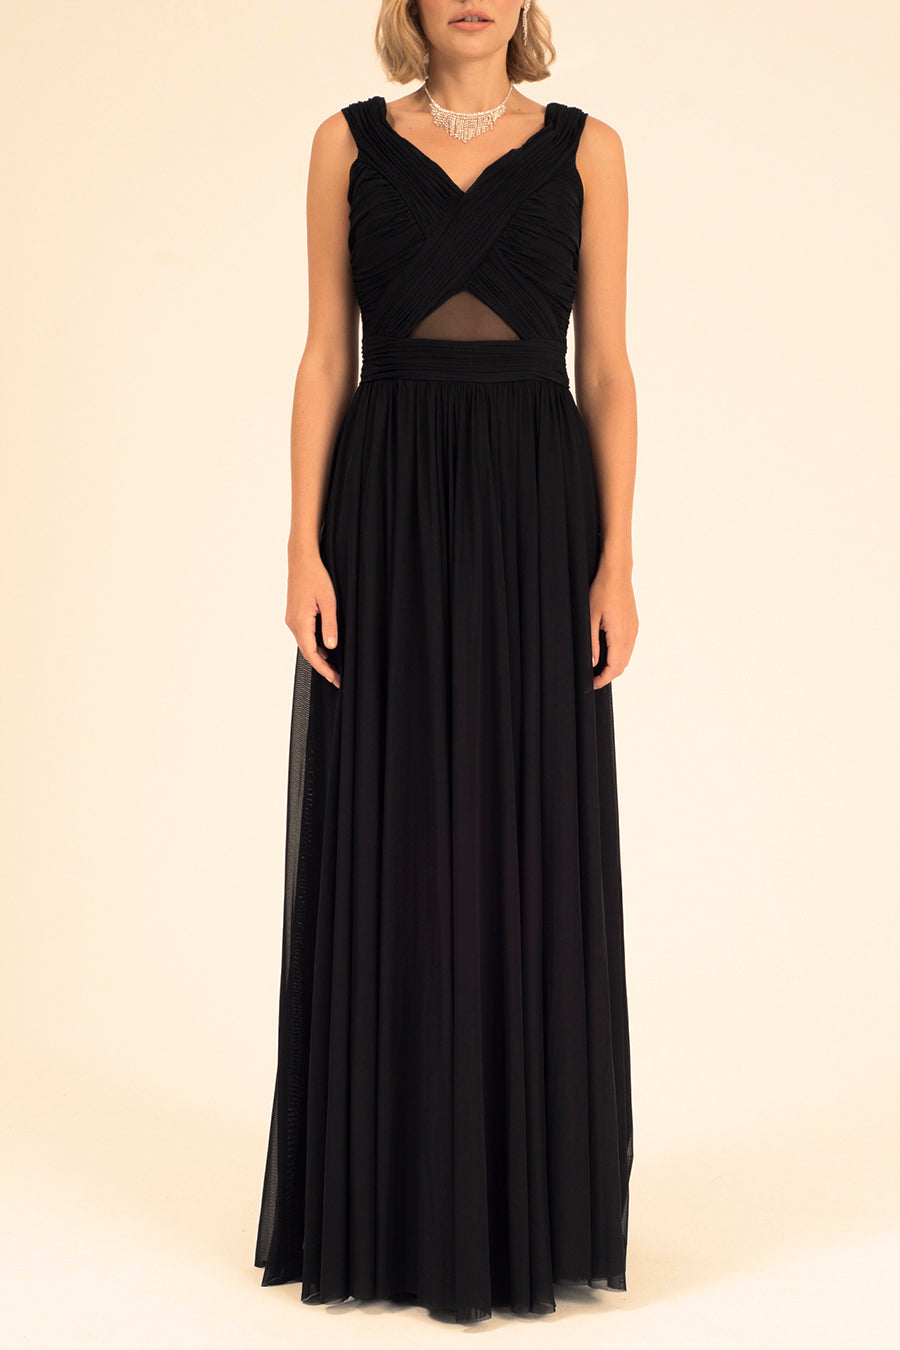 Vicky - Mystic Evenings | Evening and Prom Dresses